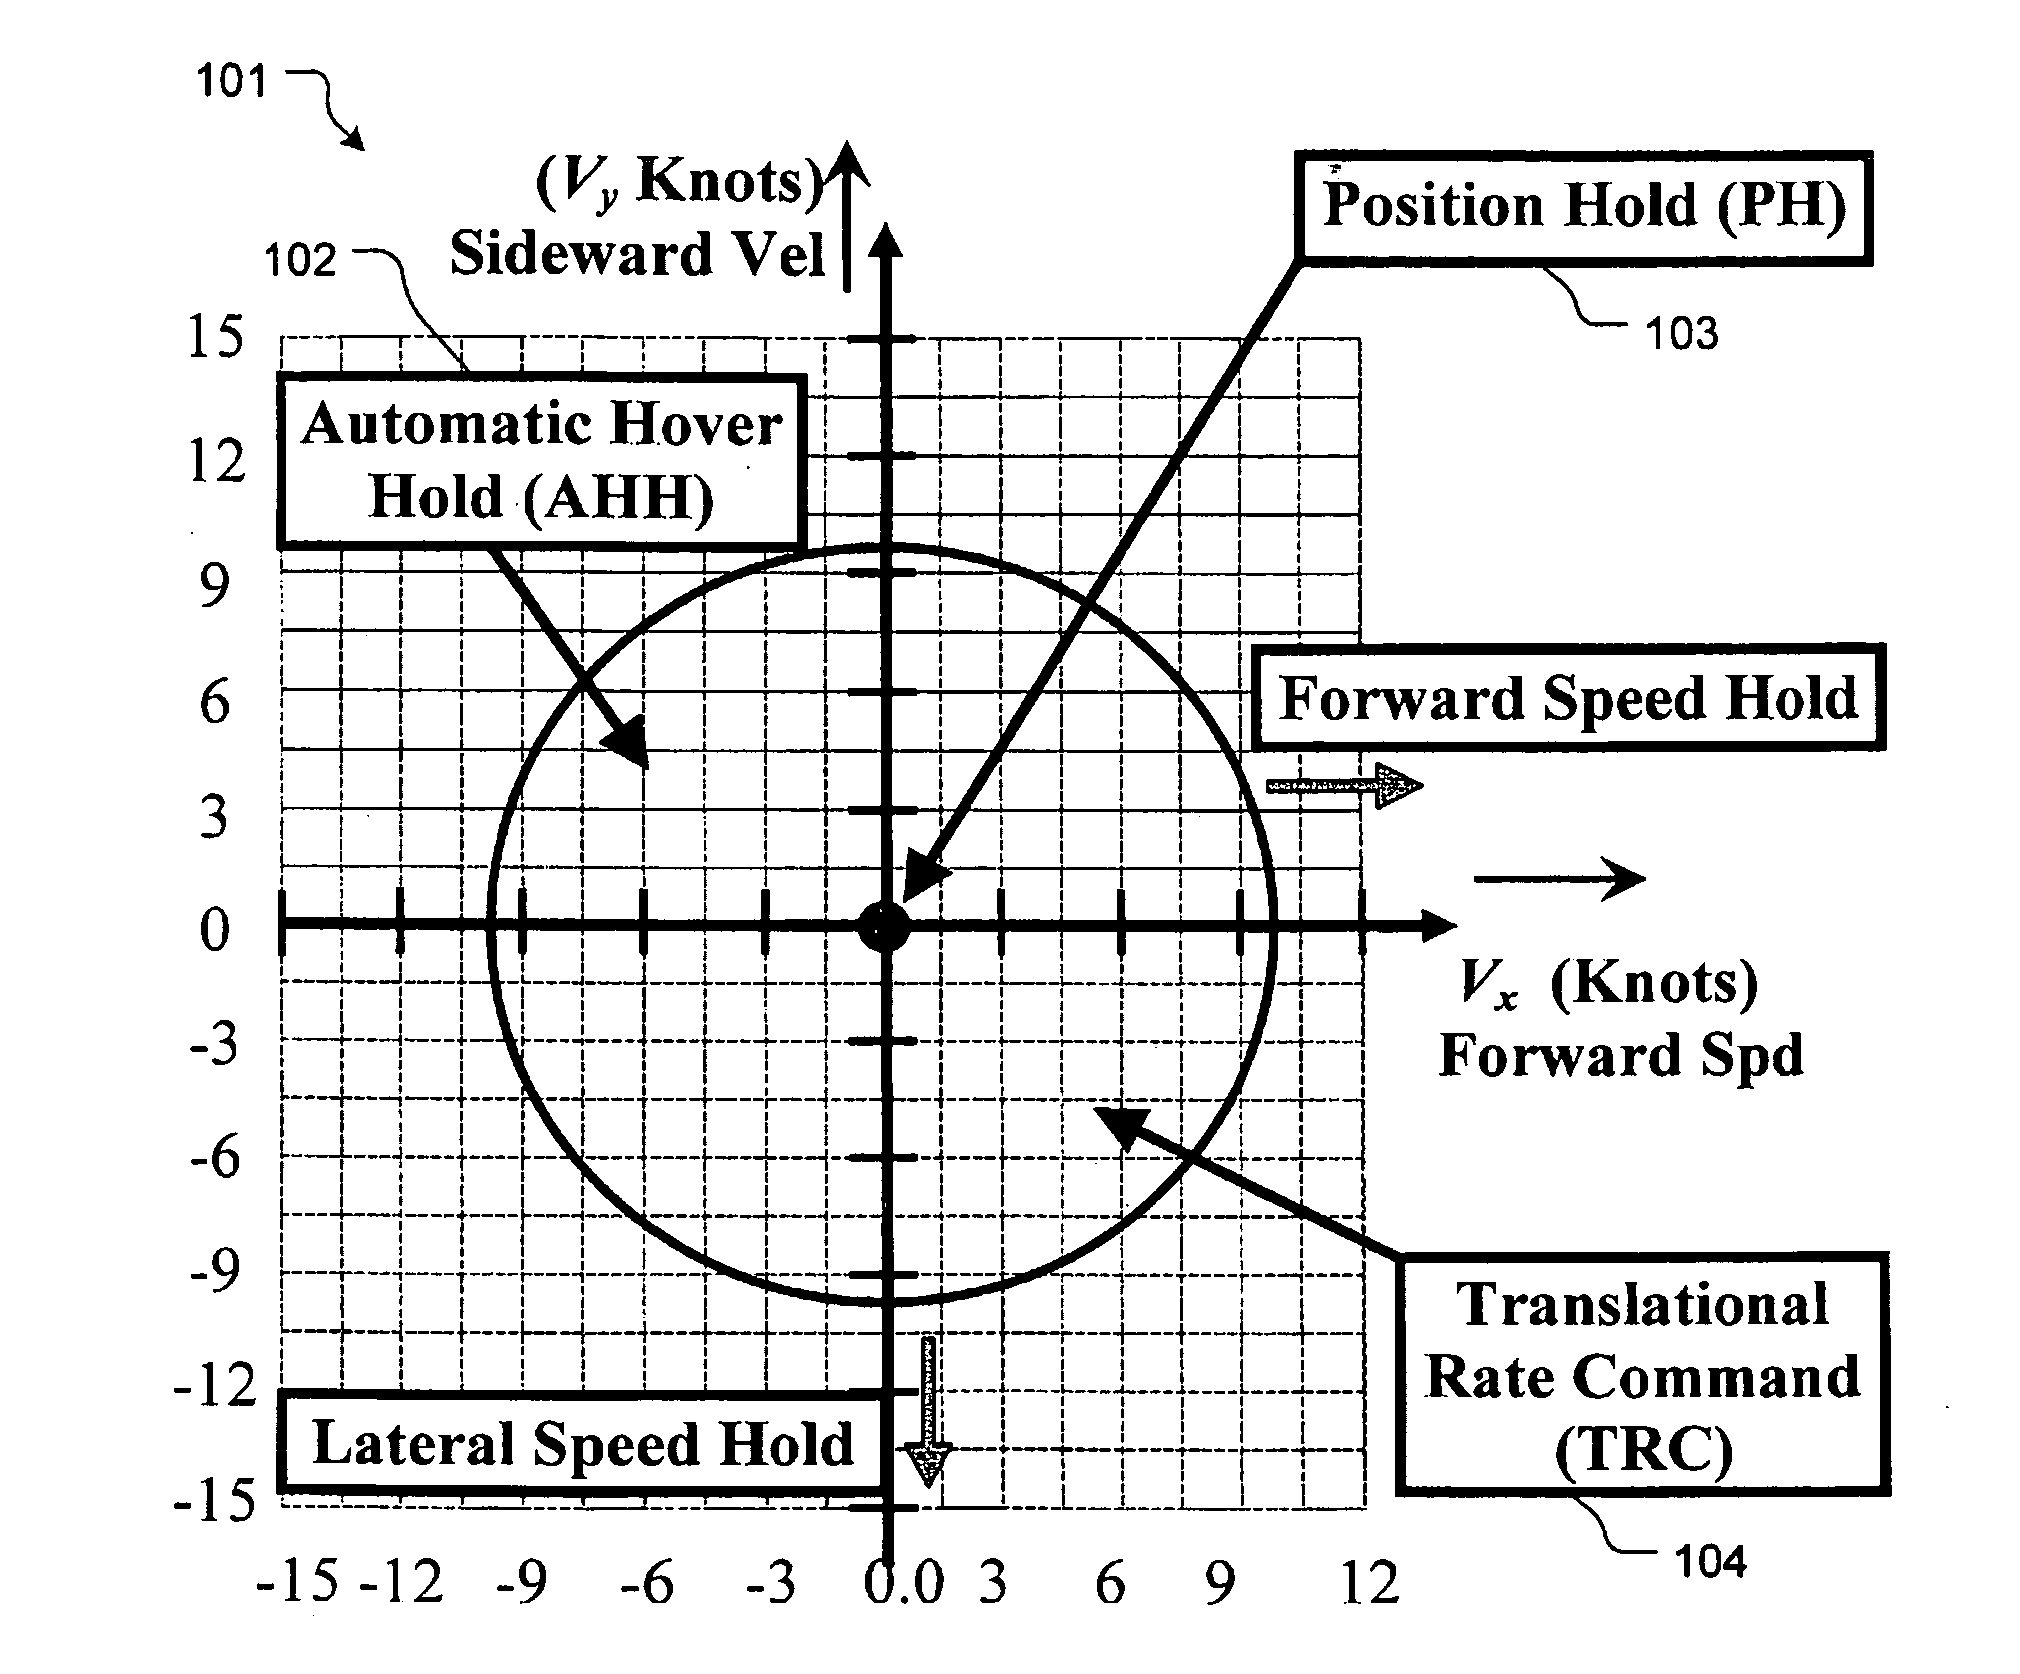 Flight control laws for automatic hover hold